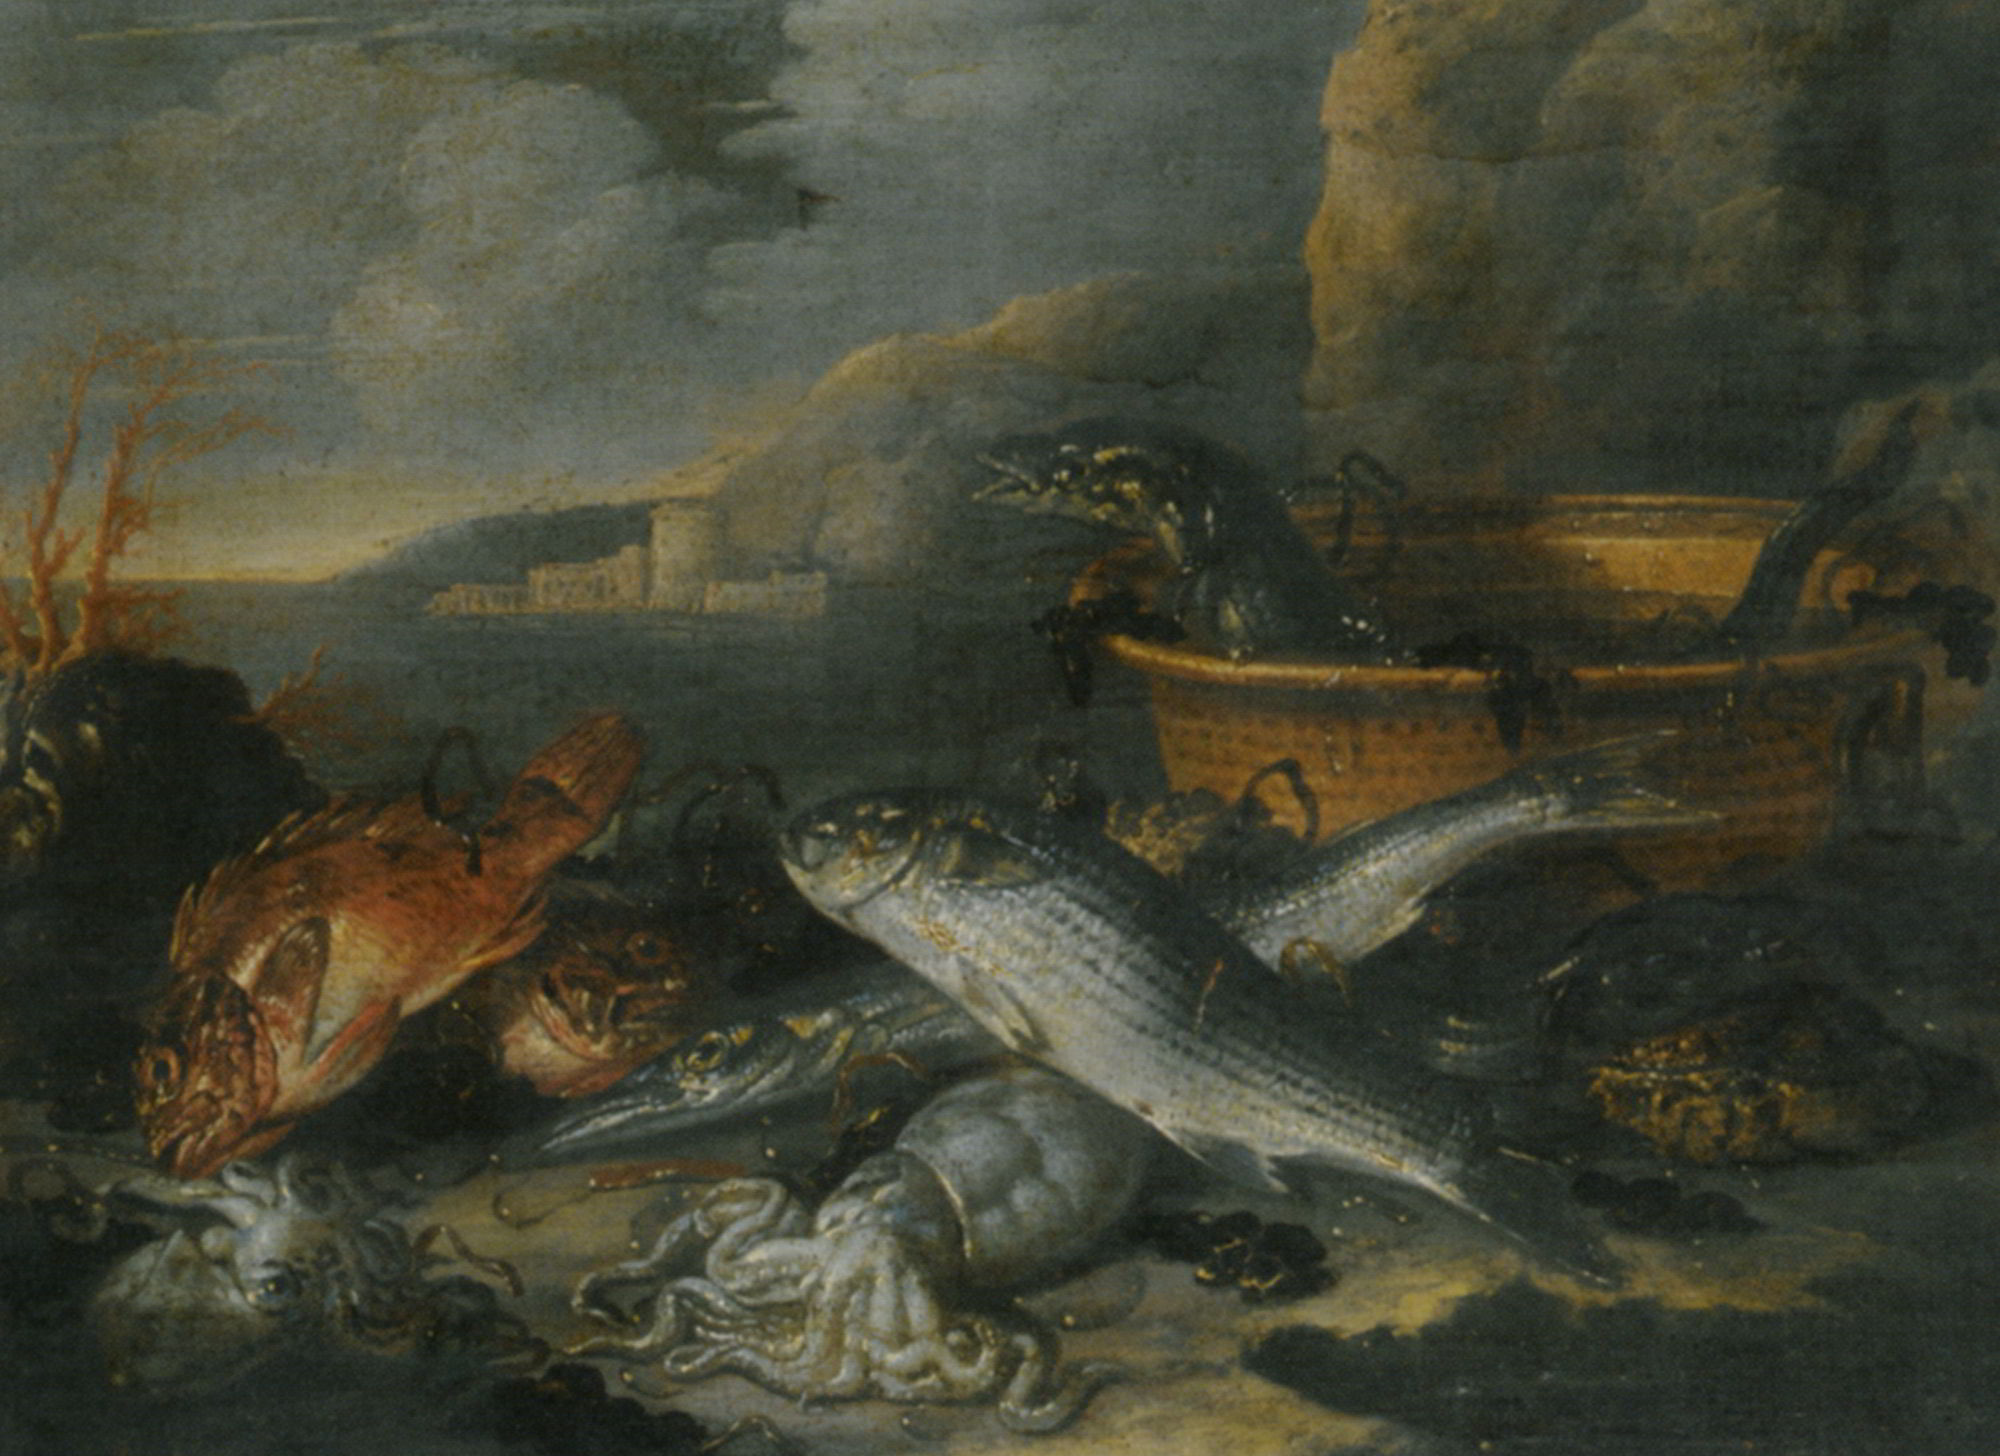 Still Life with an Assortment of Fish and Squid on a Beach by Nicola Maria Recco